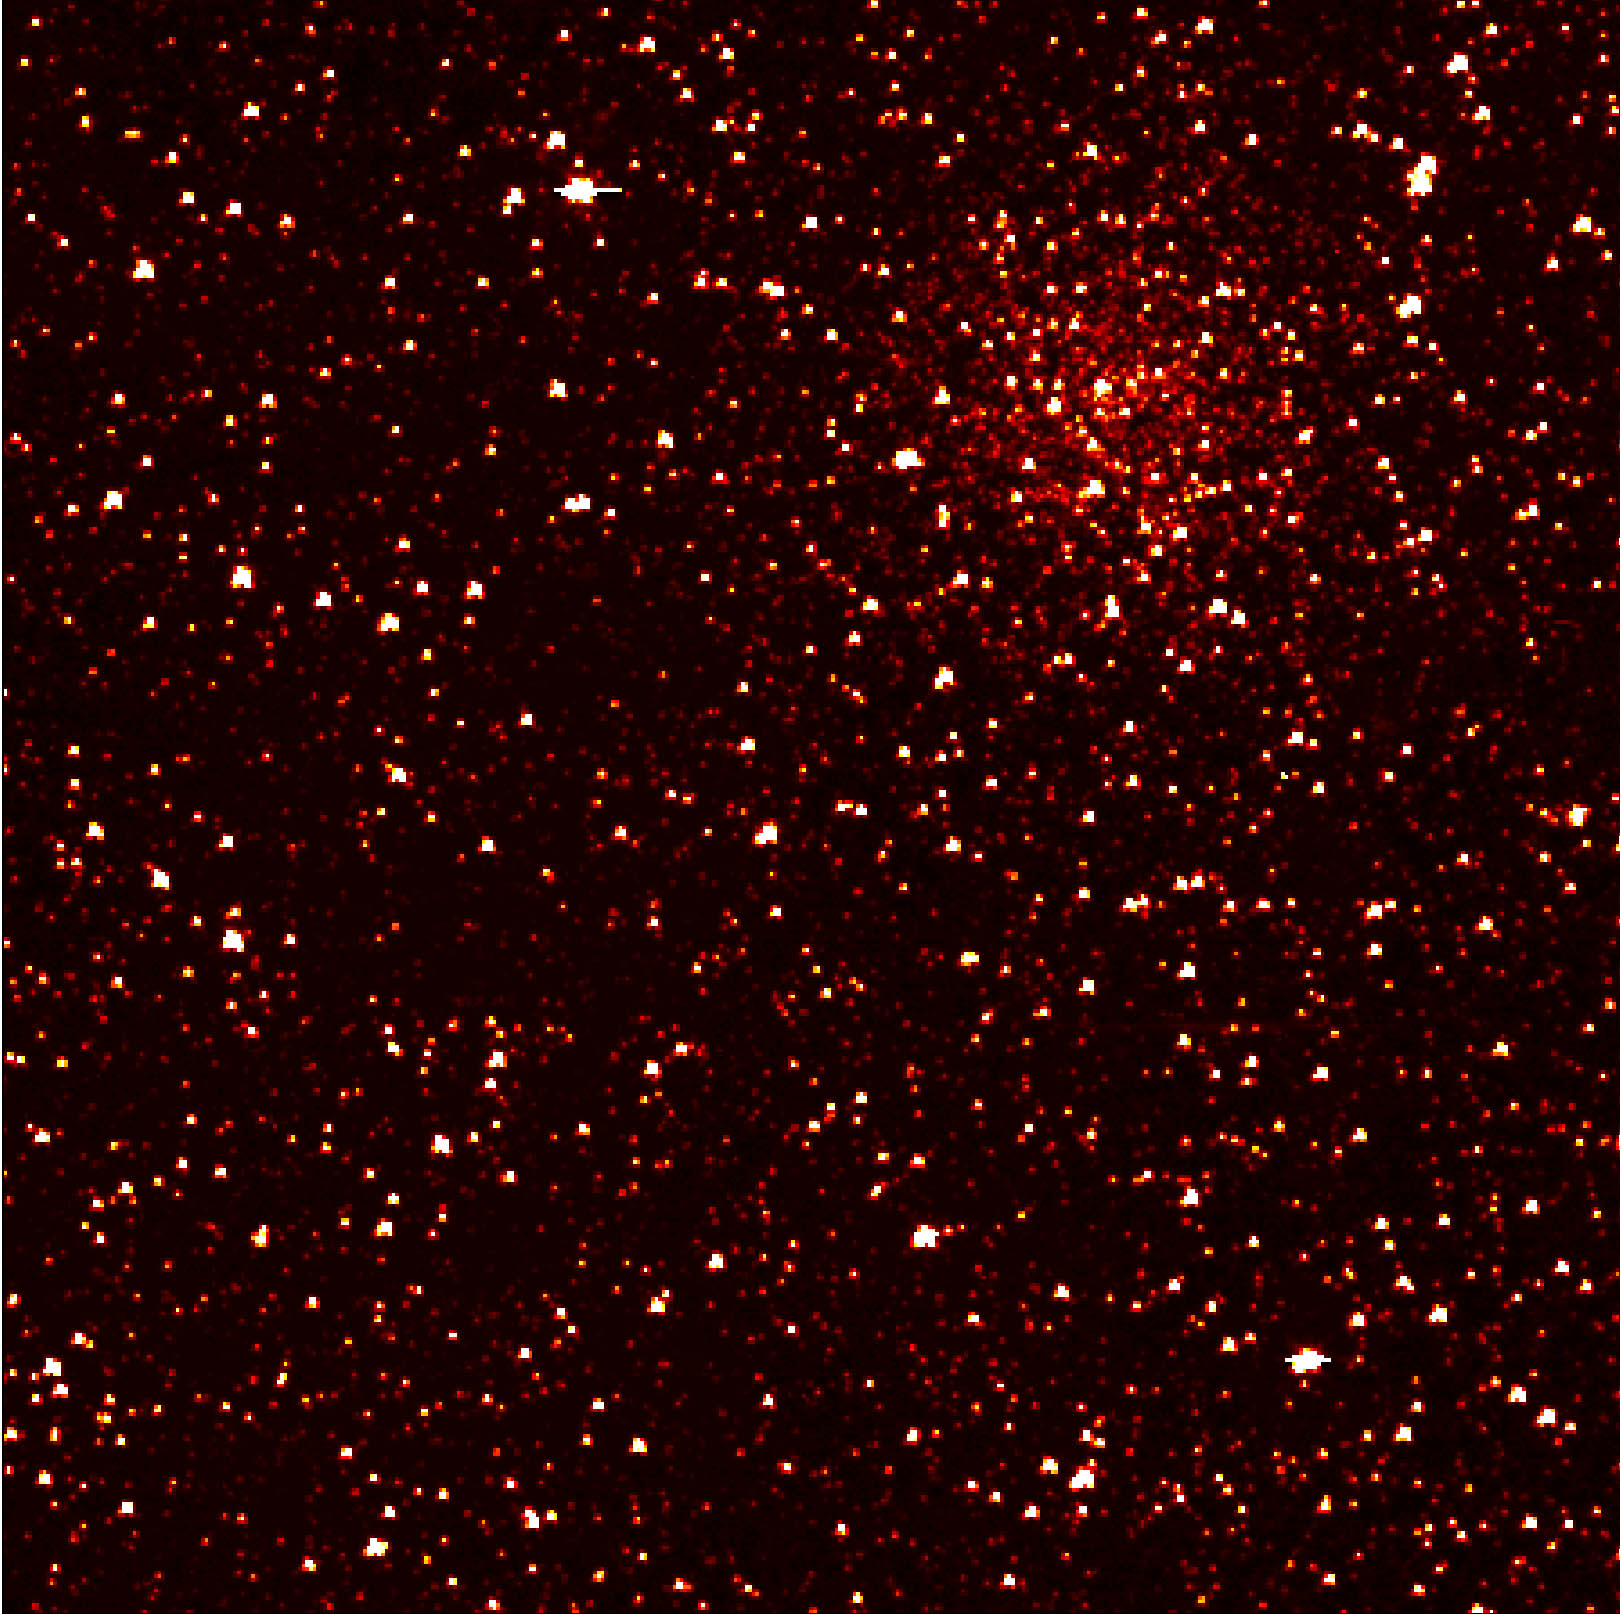 This image taken by the Kepler telescope and released by NASA on April 16, 2009, shows small portion of Kepler's full field of view -- an expansive, 100-square-degree patch of sky in our Milky Way galaxy. An eight-billion-year-old cluster of stars 13,000 light-years from Earth, called NGC 6791, can be seen in the image. Clusters are families of stars that form together out of the same gas cloud. This particular cluster is called an open cluster, because the stars are loosely bound and have started to spread out from each other. Launched in March, Kepler will spend 3 1/2 years studying these stars in search of small, rocky planets. AFP PHOTO/HO/NASA  / AFP PHOTO / NASA / HO